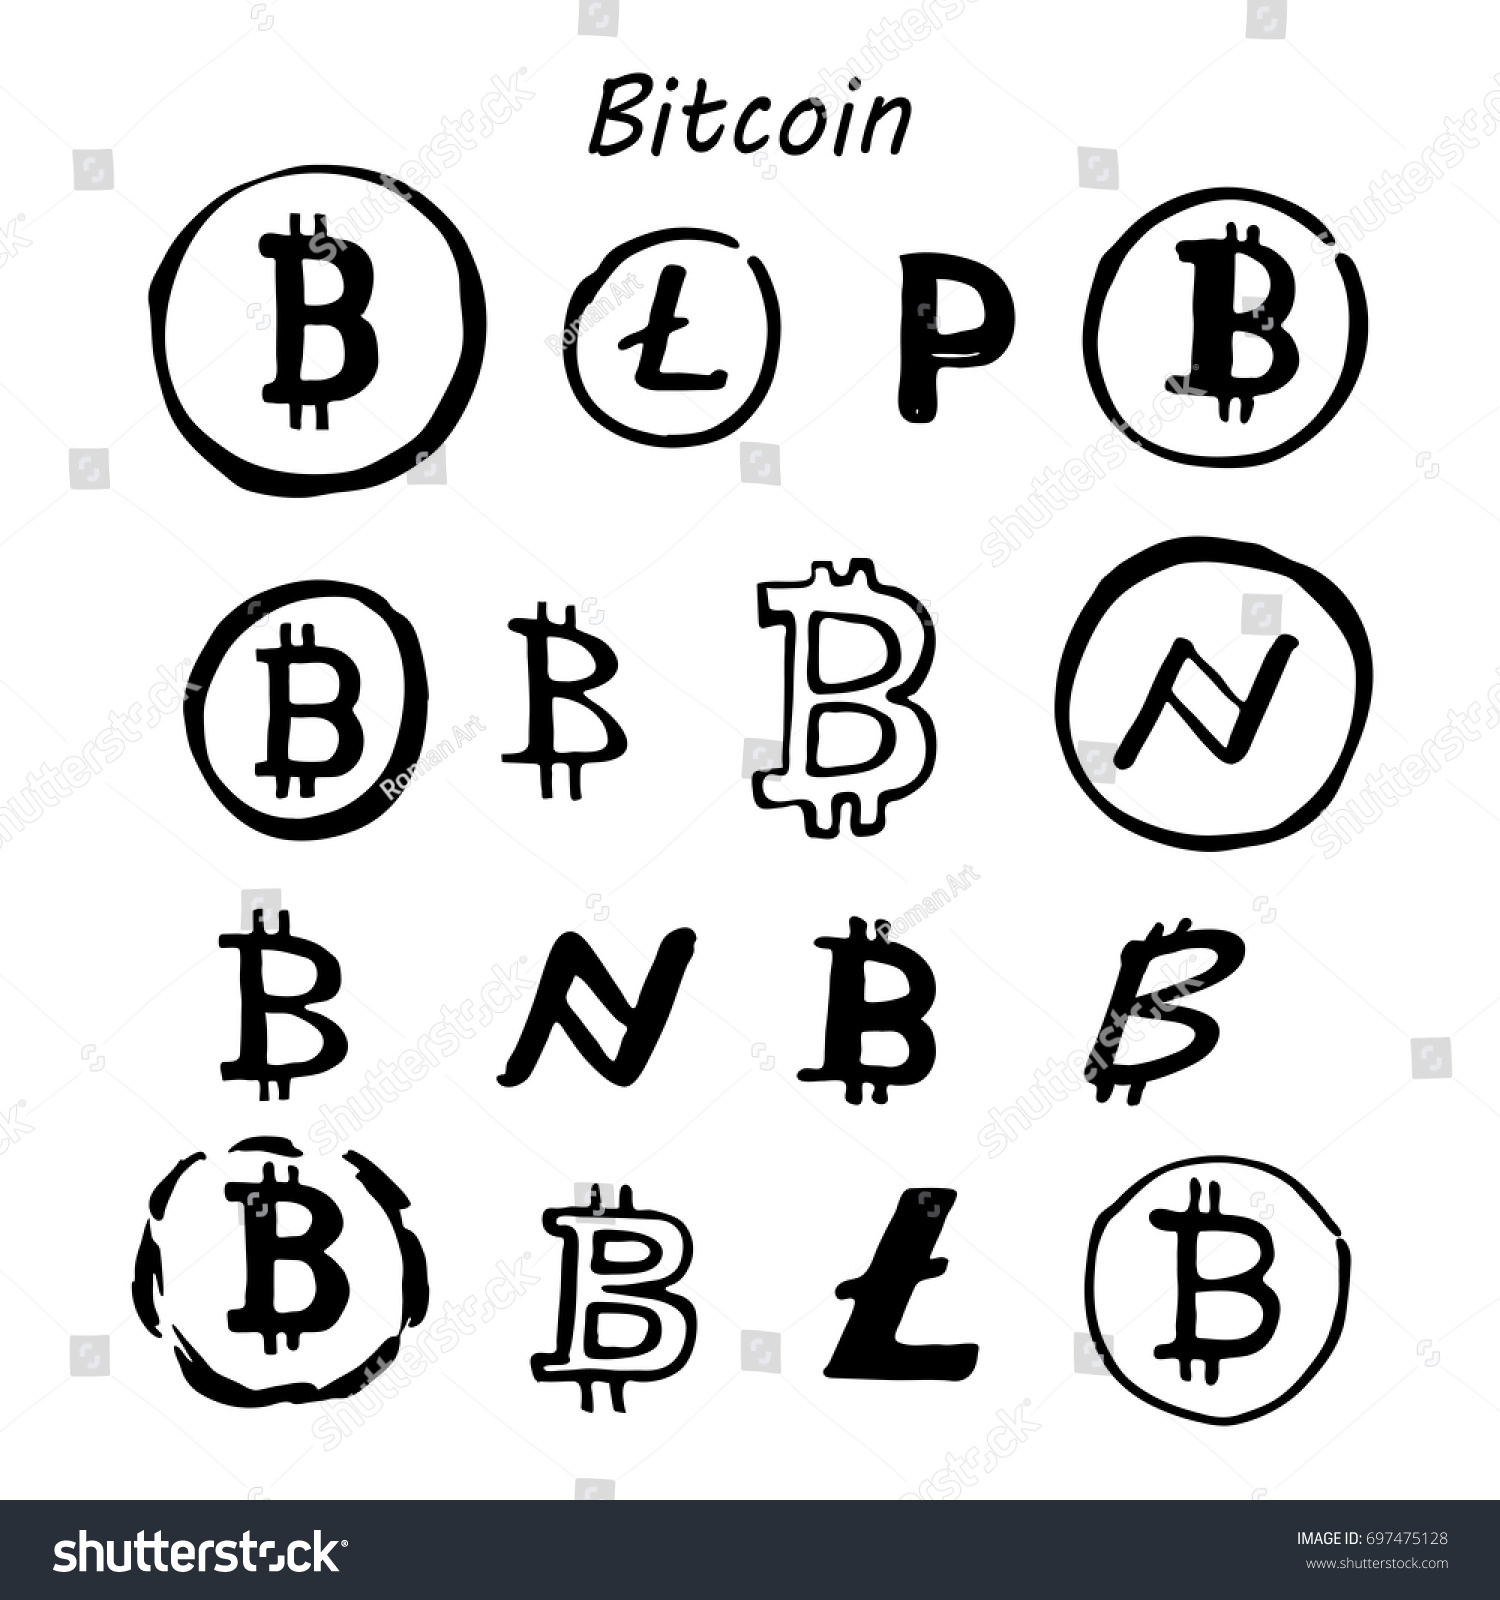 SVG of Bitcoin  litecoin sketch sign icon set for internet money. Crypto currency symbol and coin image for using in web projects or mobile applications. svg